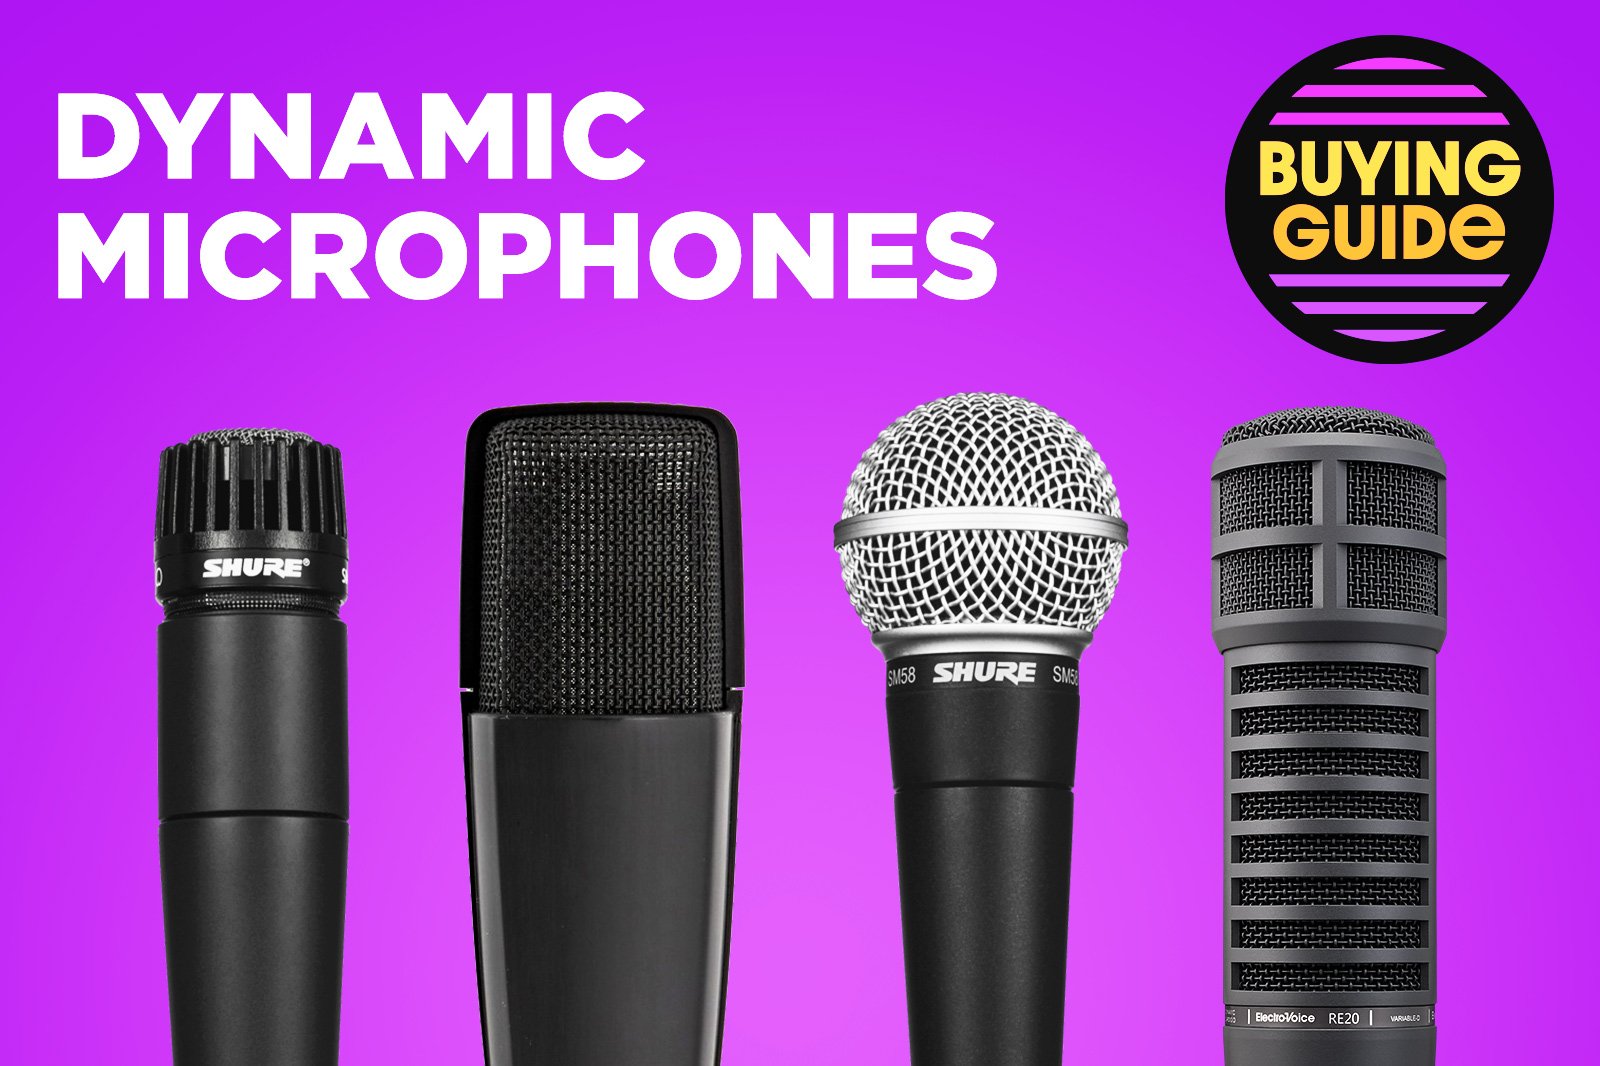 Buying Guide: Dynamic Microphones